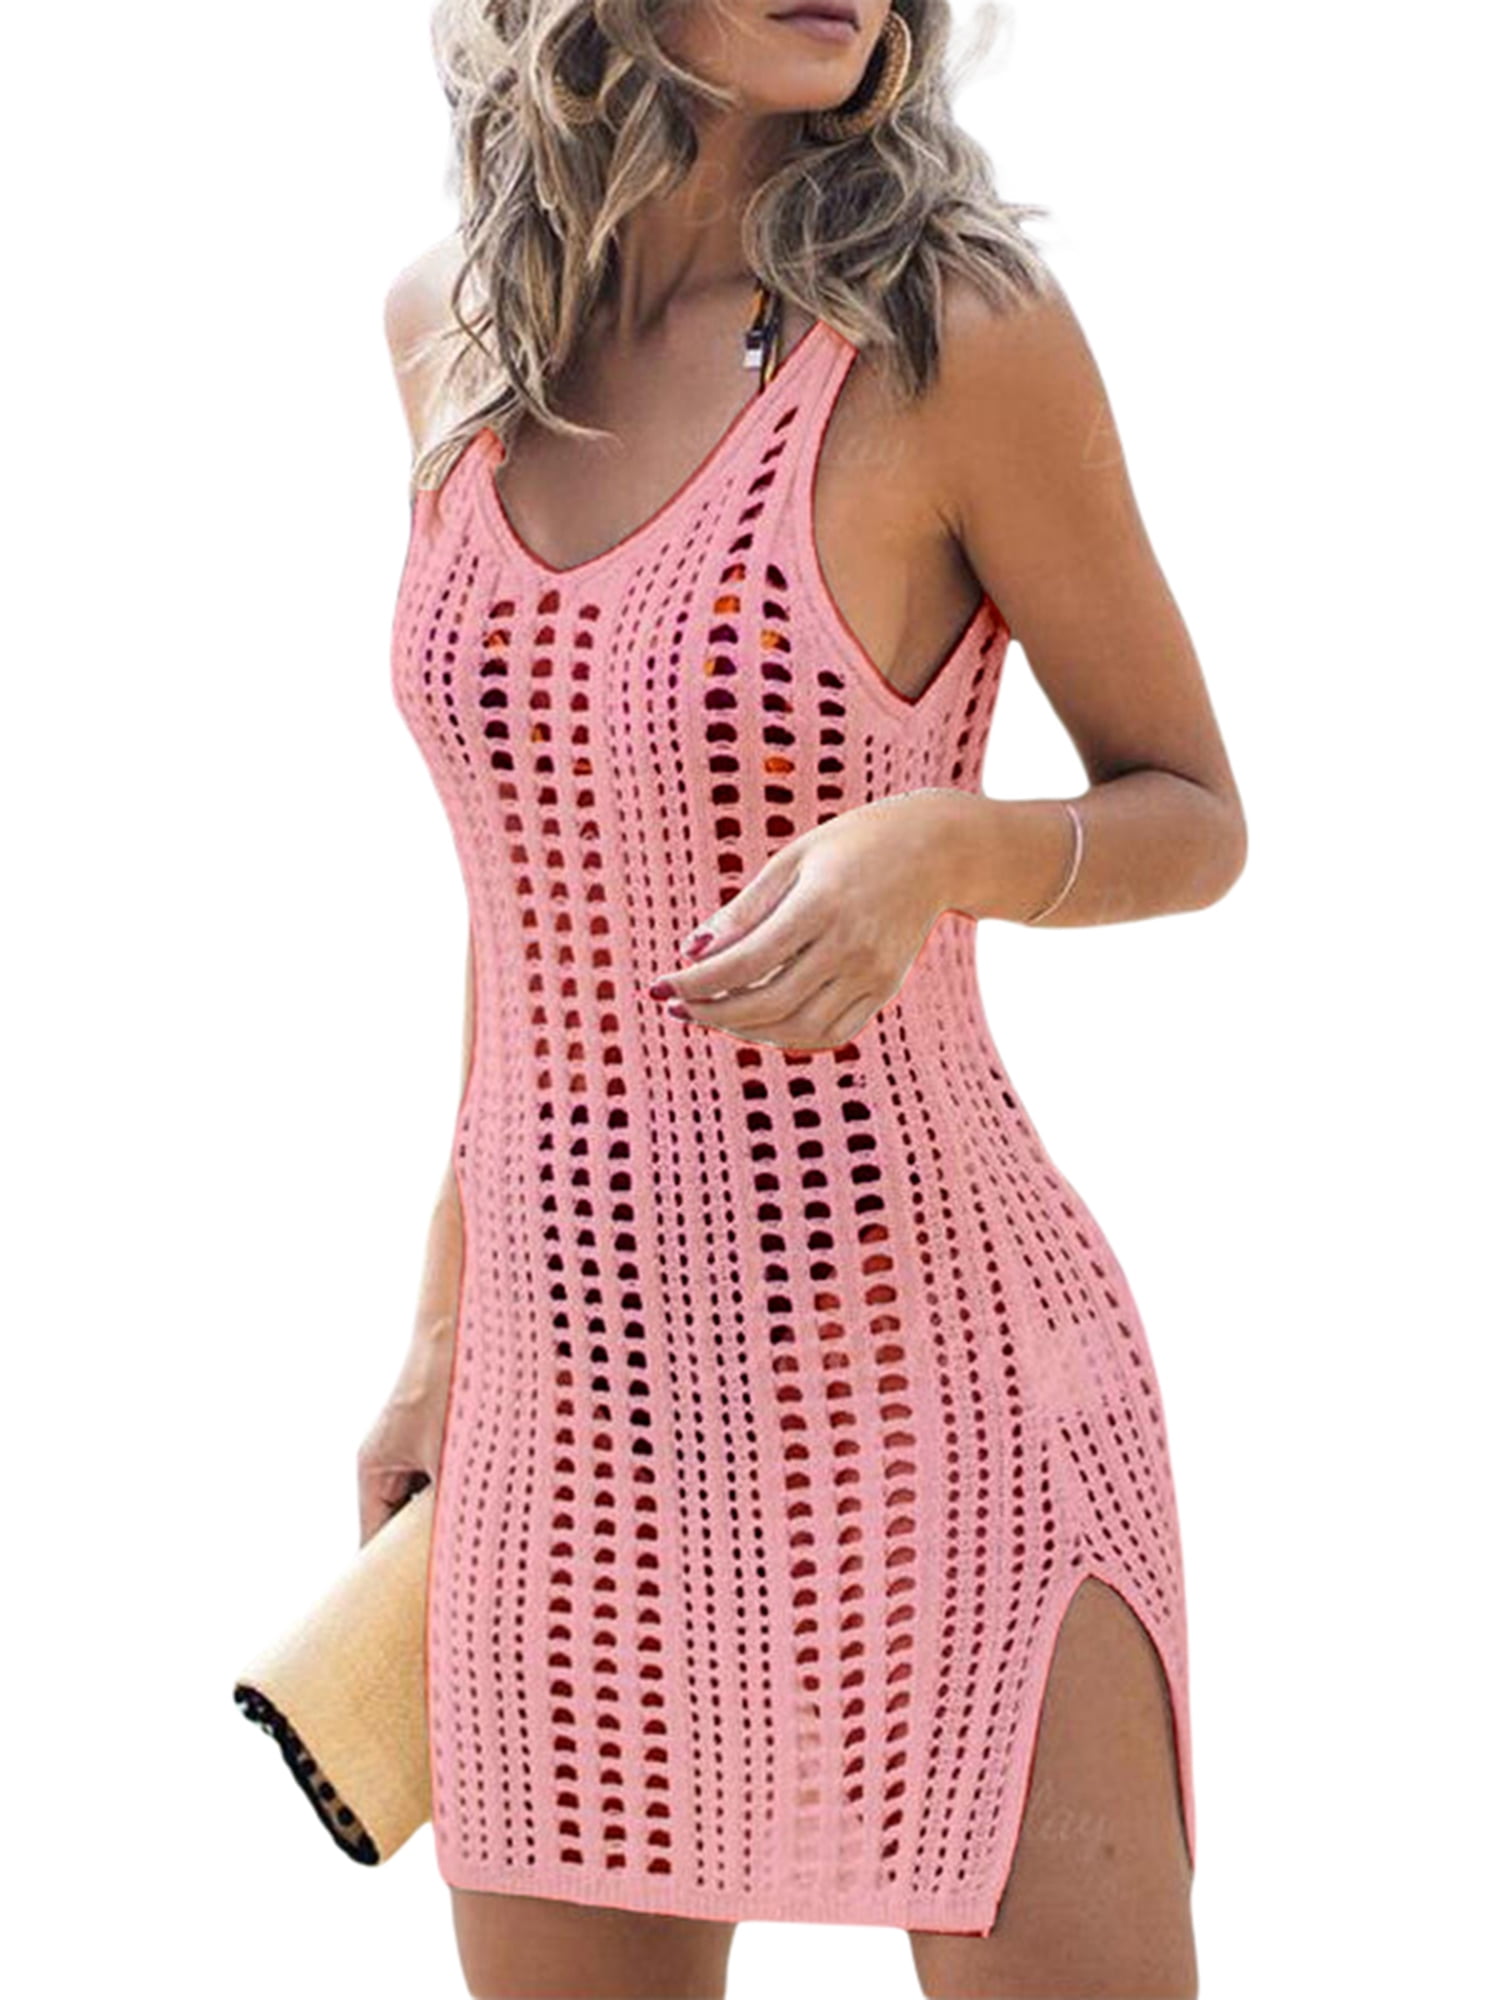 Waiting for Summer Coral Pink Crochet Swim Cover-Up Maxi Dress